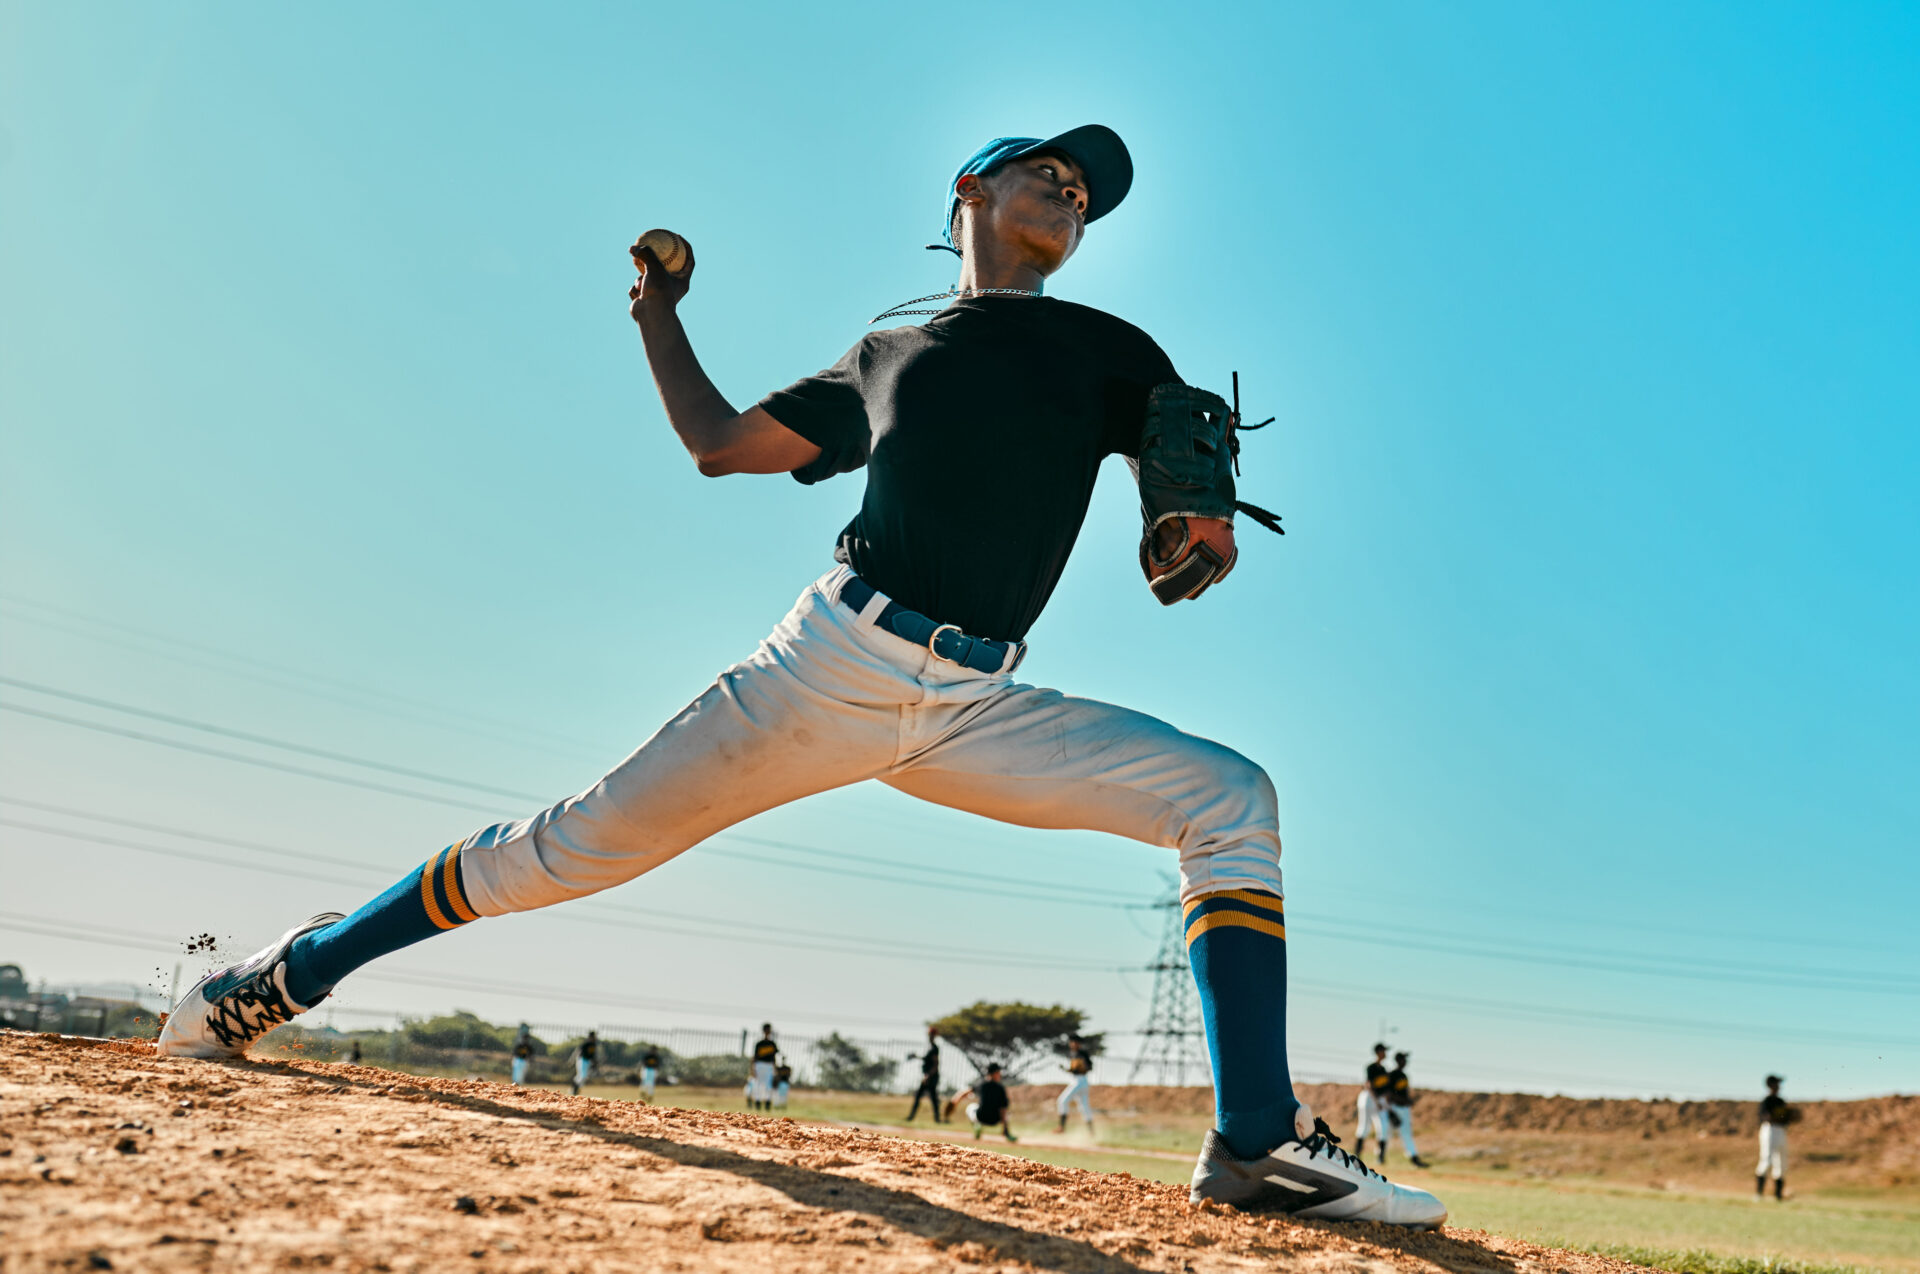 Shot of a young baseball player pitching the ball during a game outdoors. He is mid-throw.